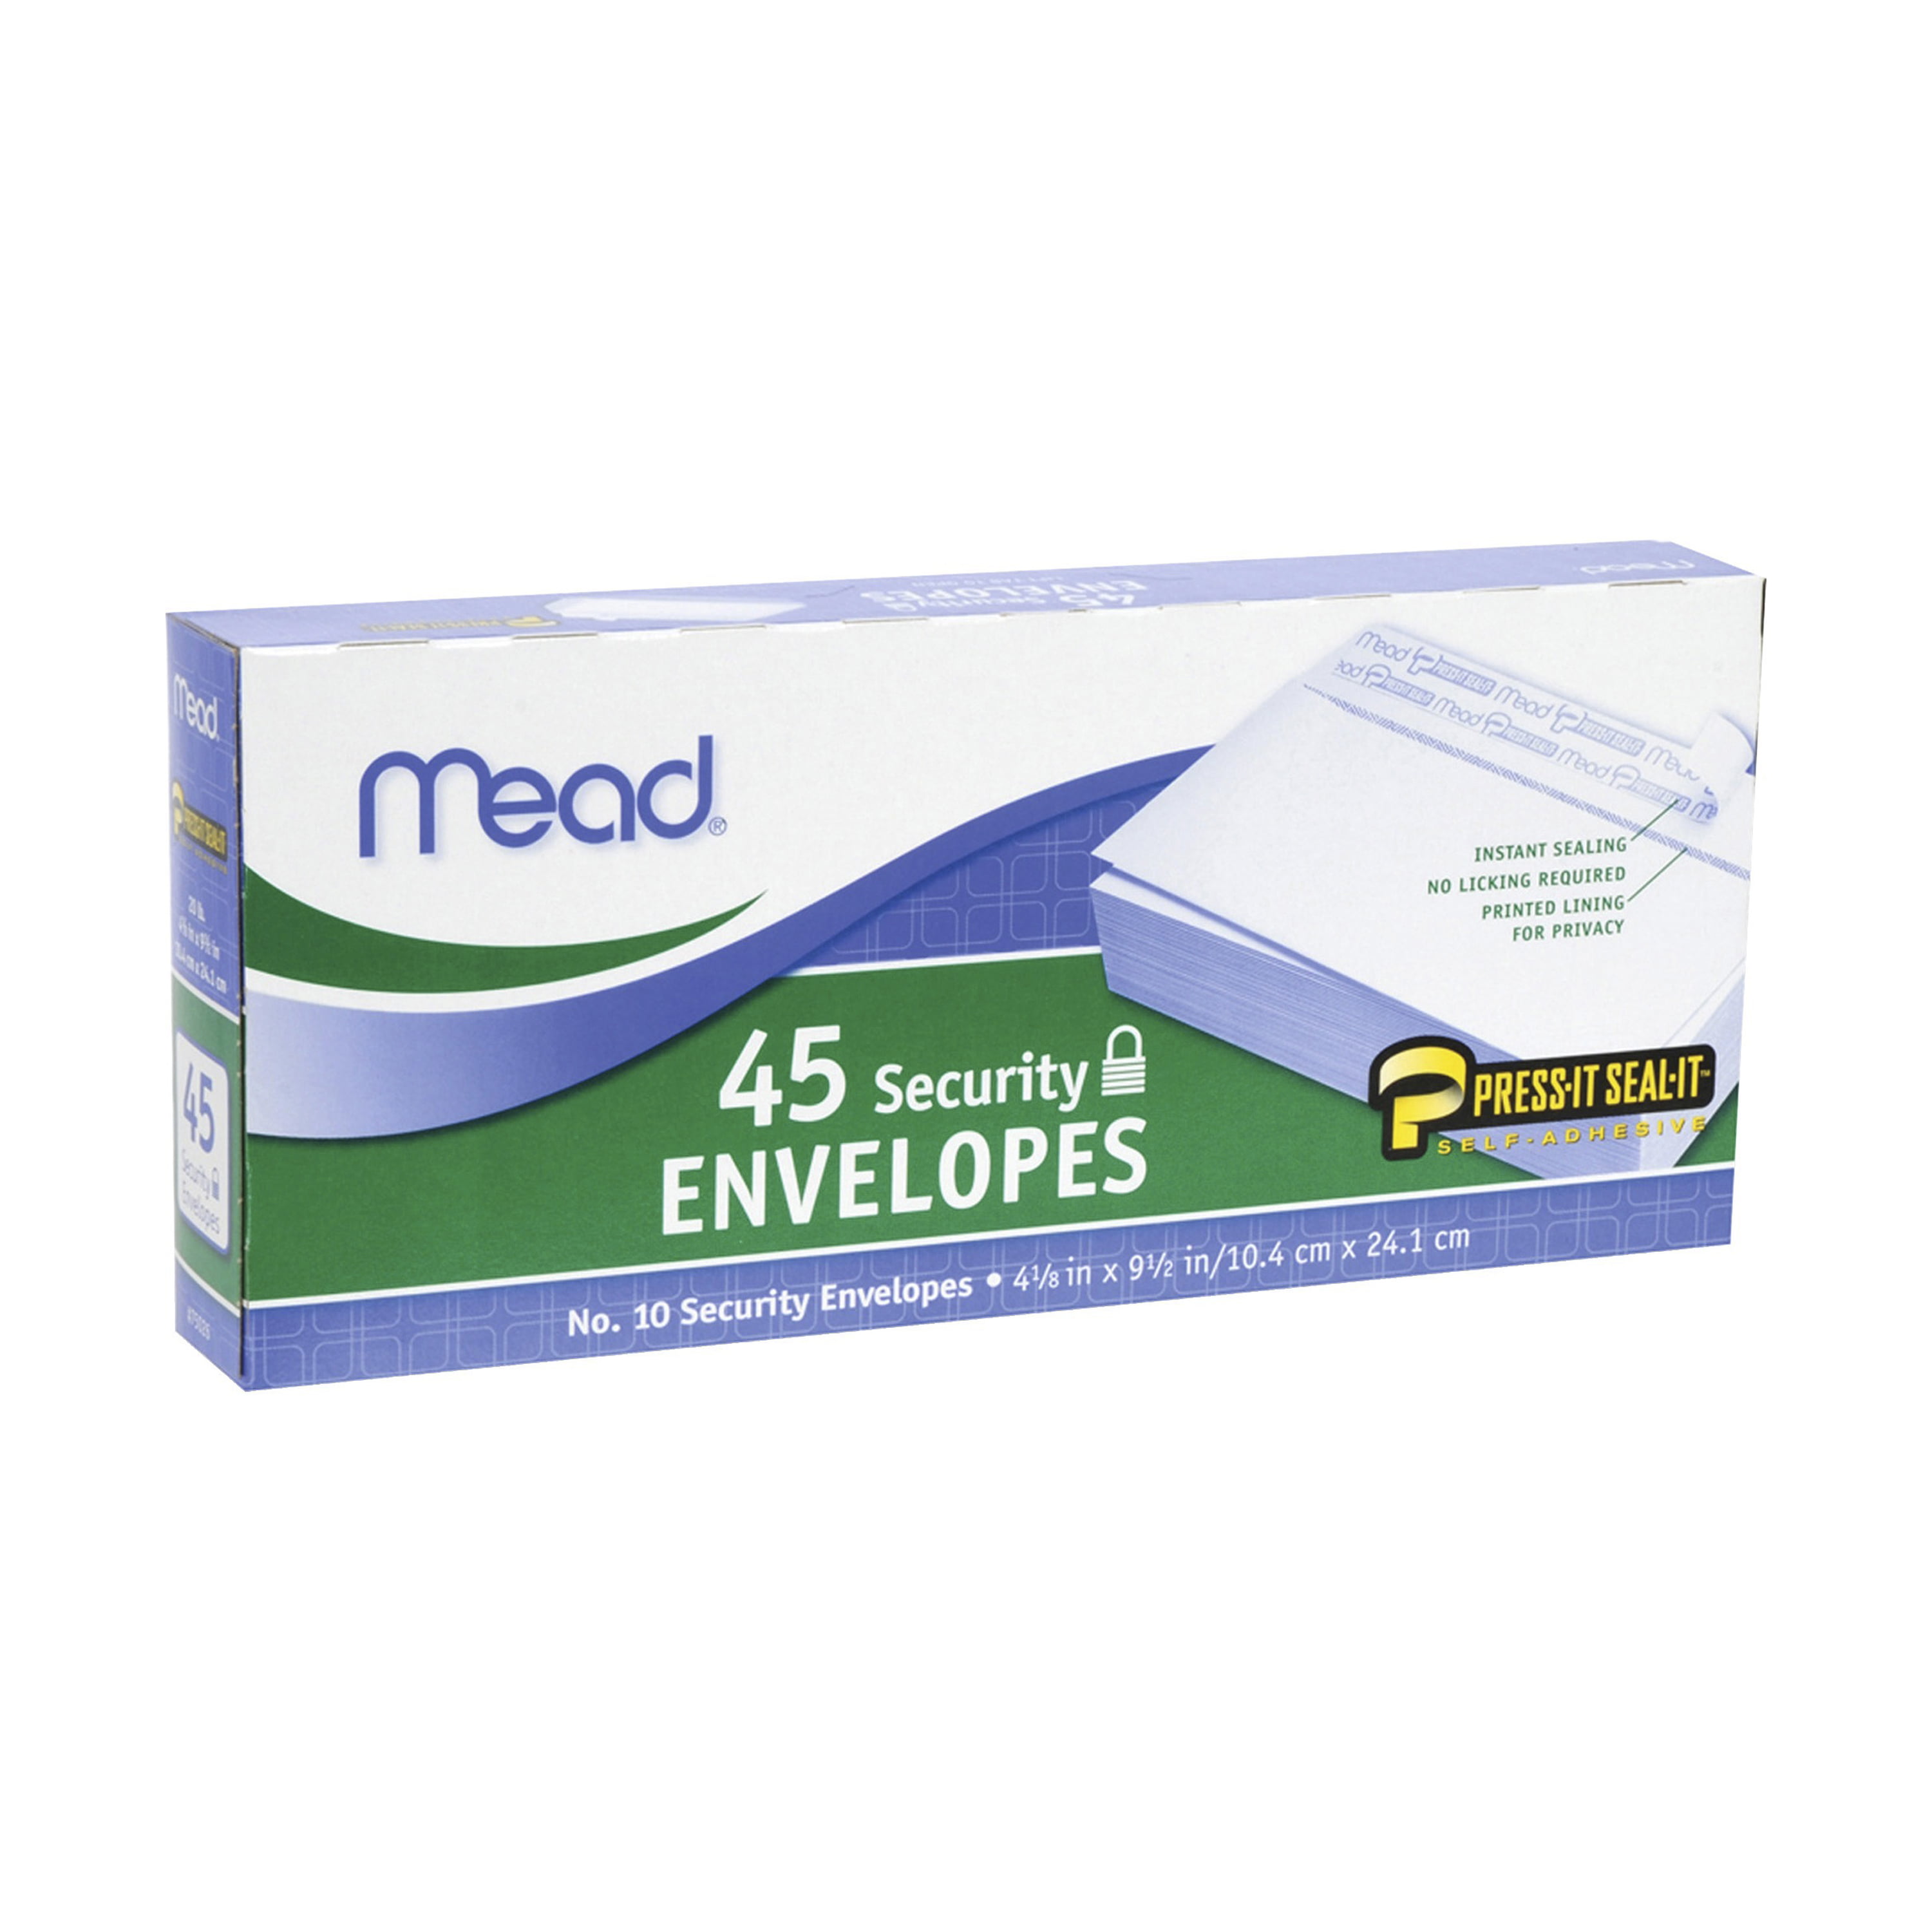 Mead #10 Self Seal Security Envelopes Press-it Seal-it White for Privacy 45 ct 